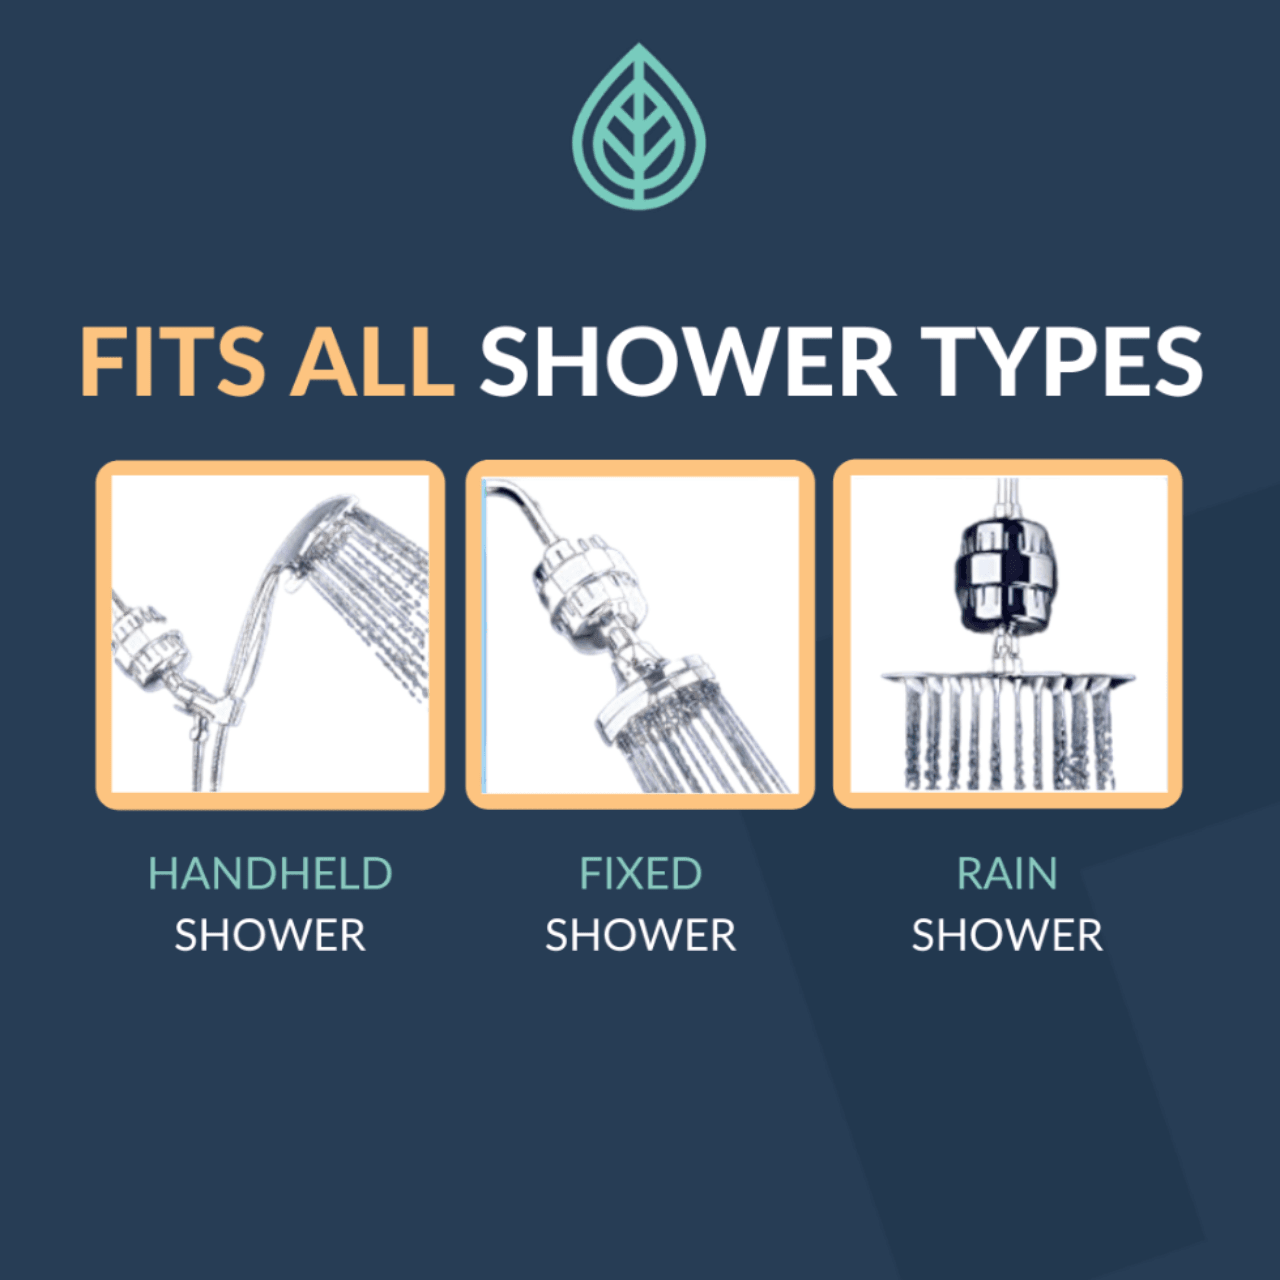 8-Stage Shower Filter - The Goodfor Company